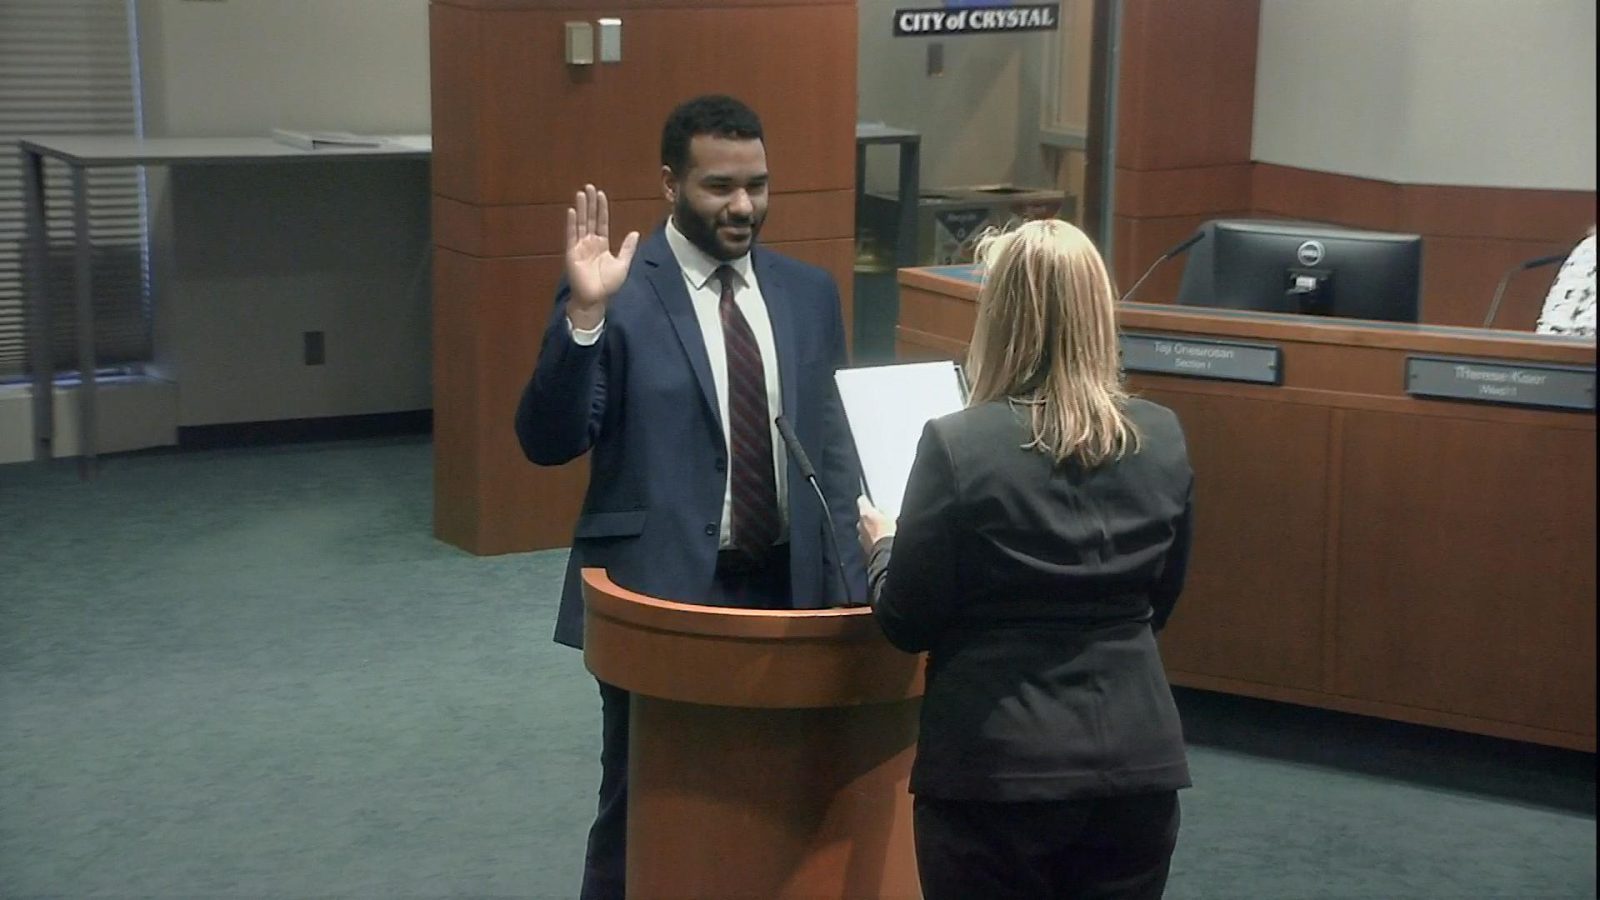 The city of Crystal swore in Taji Onesirosan as the newest member of the Crystal City Council on April 18. Onesirosan topped a field of 11 applicants for the seat, ultimately winning the seat by coin toss.